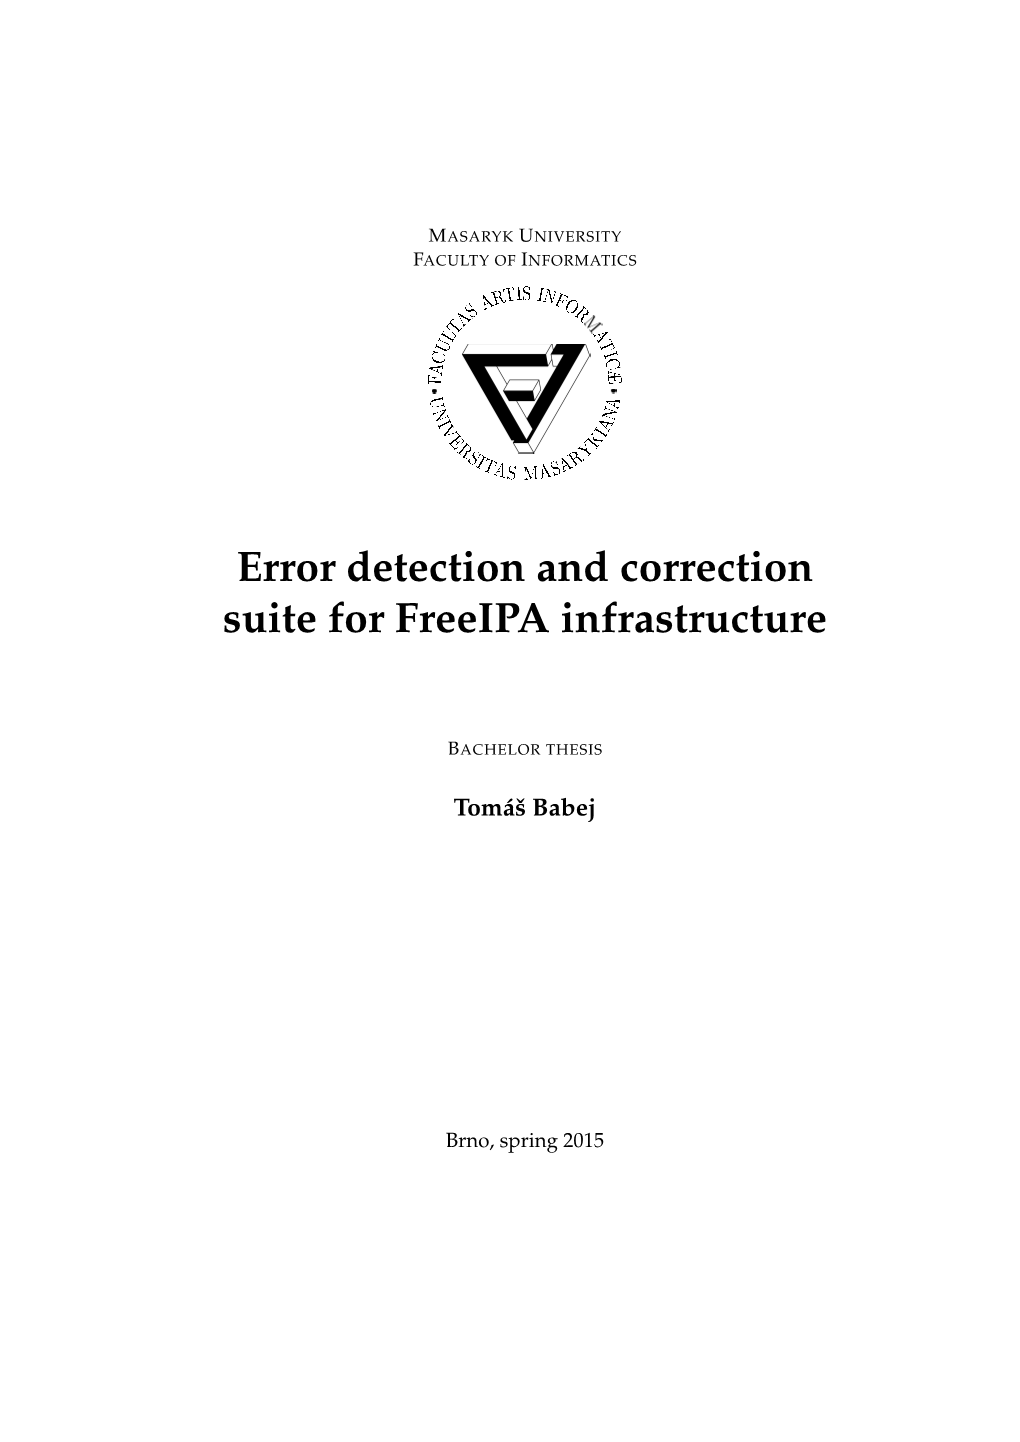 Error Detection and Correction Suite for Freeipa Infrastructure